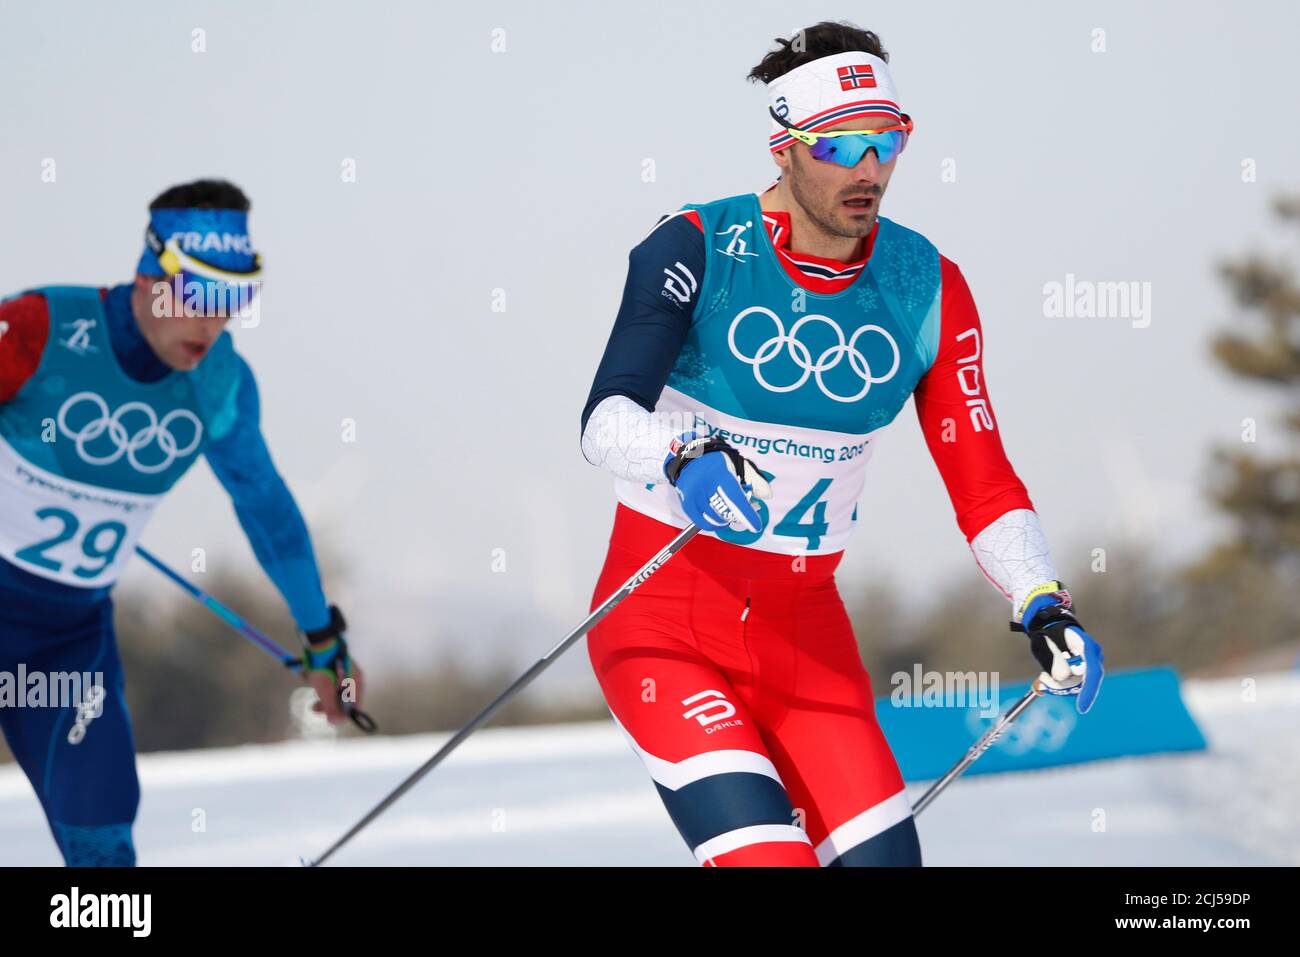 Cross-Country Skiing – Pyeongchang 2018 Winter Olympics – Men's 15km Free – Alpensia Cross-Country Skiing Centre – Pyeongchang, South Korea – February 16, 2018 - Hans Christer Holund of Norway and Adrien Backscheider of France compete. REUTERS/Murad Sezer Stock Photo